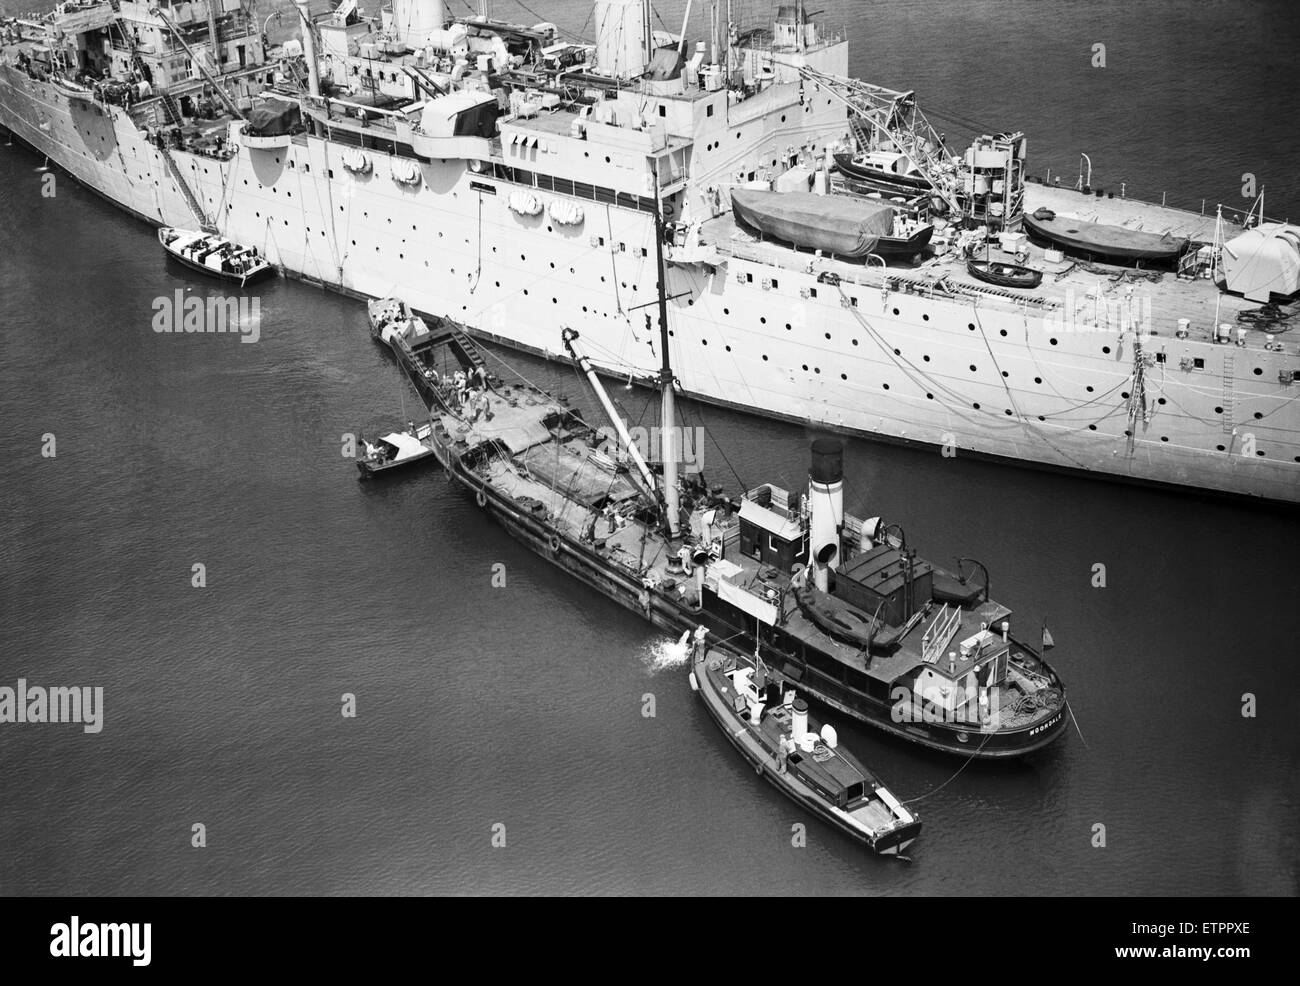 HM Submarine Sidon sank in Portland Harbour after an explosion. She was moored alongside the HMS Maidstone at the time. Pictured, the salvage operation. 16th June 1955. Stock Photo